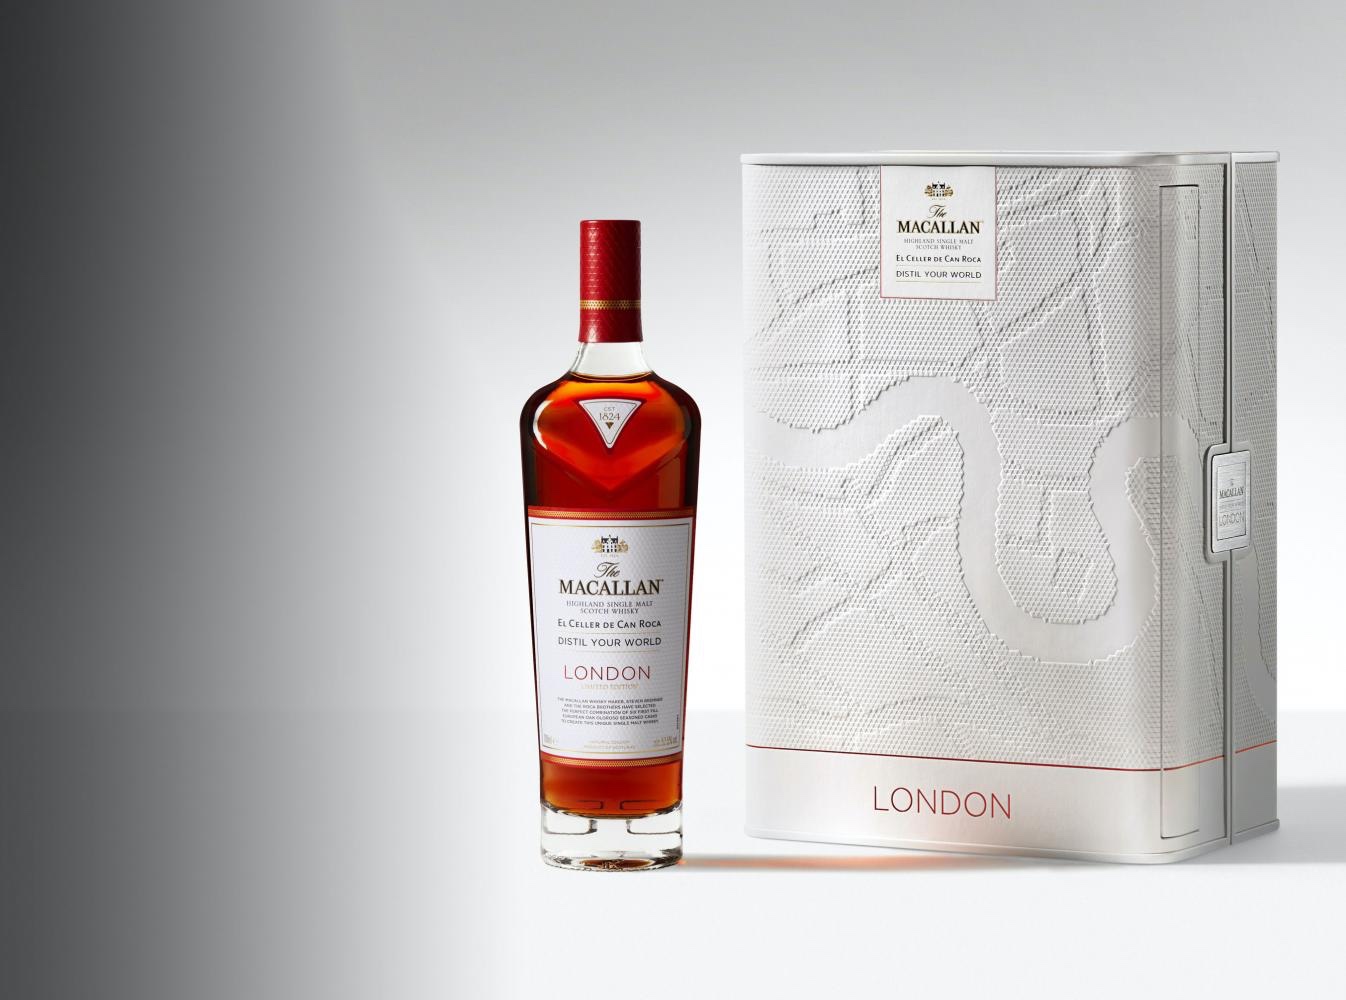 Macallan Distill Your World: London Edition featured image